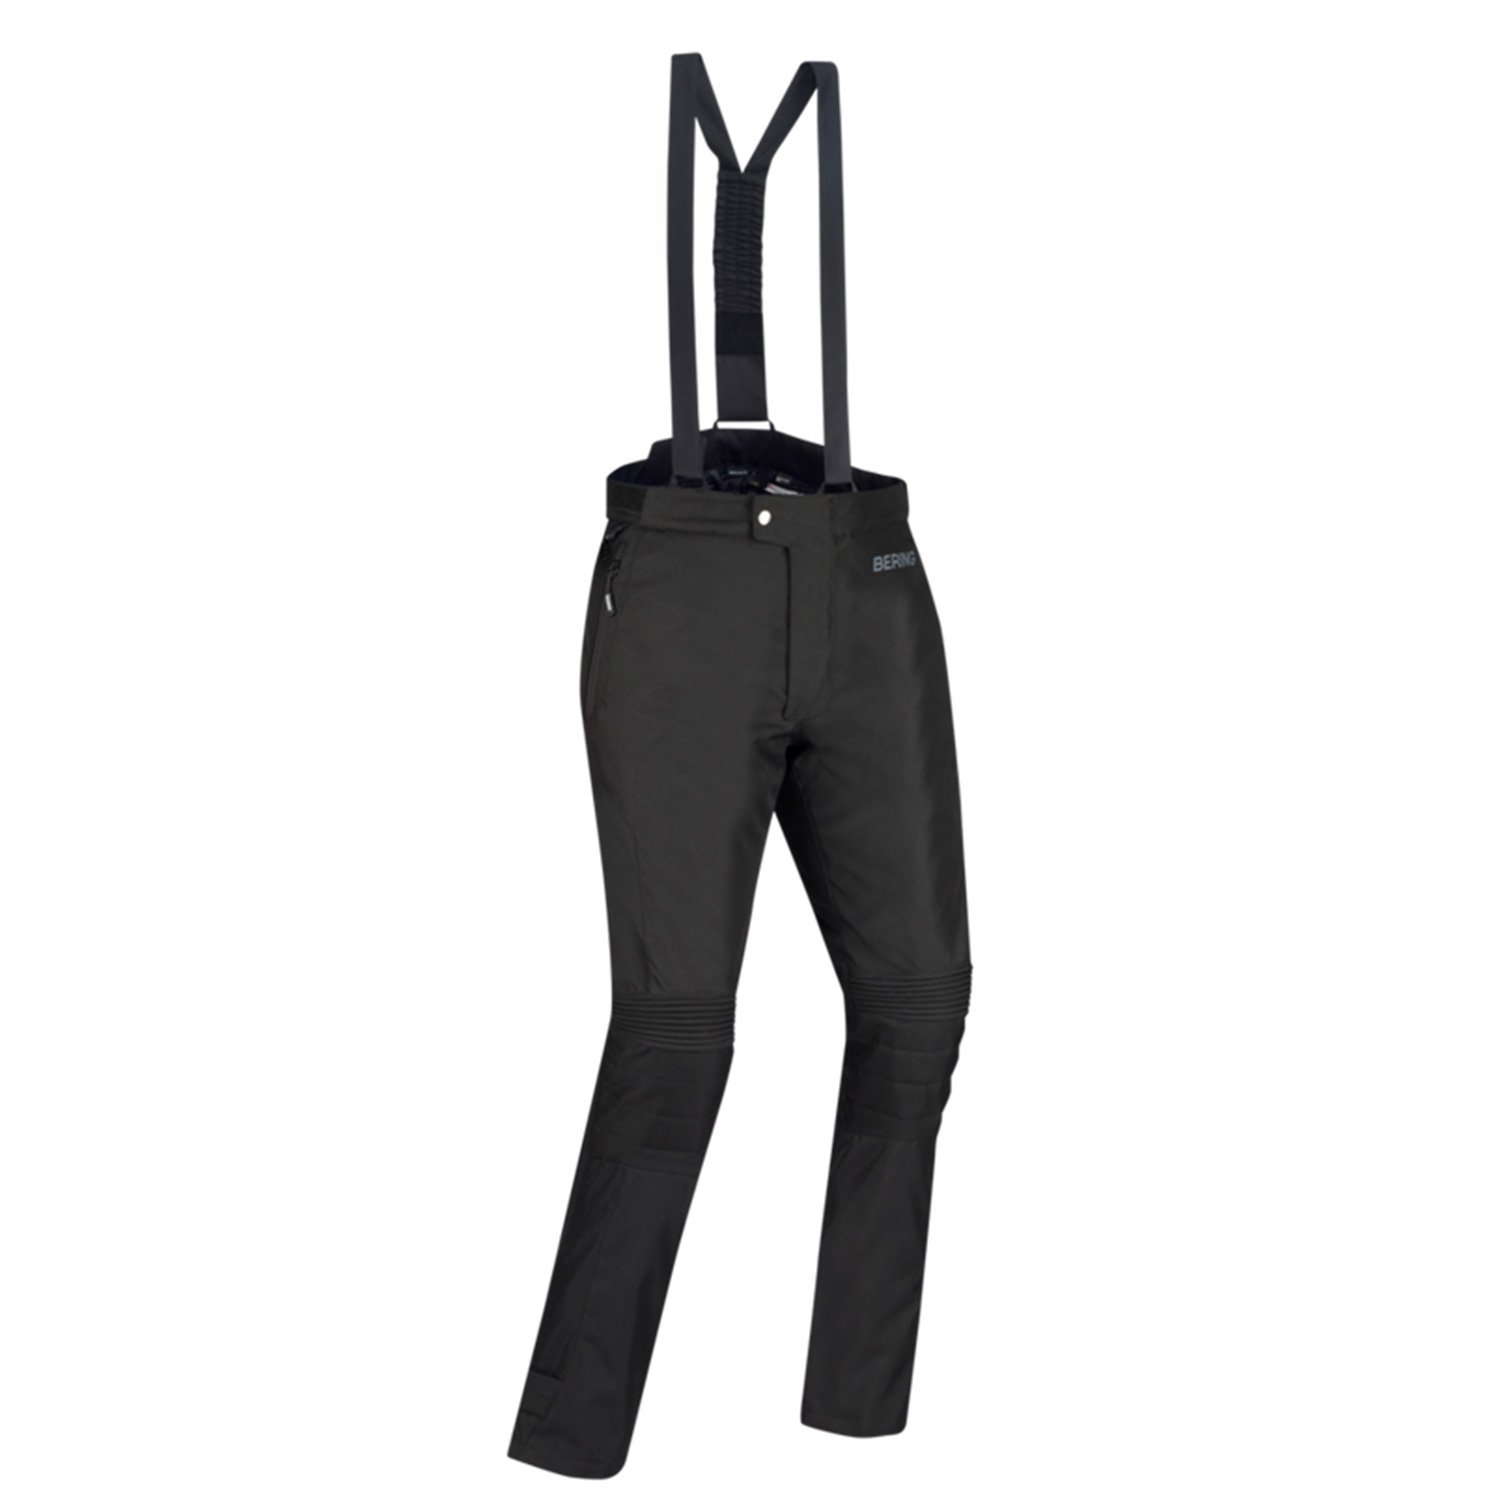 Image of Bering Lady Siberia Trousers Black Size T2 ID 3660815182918